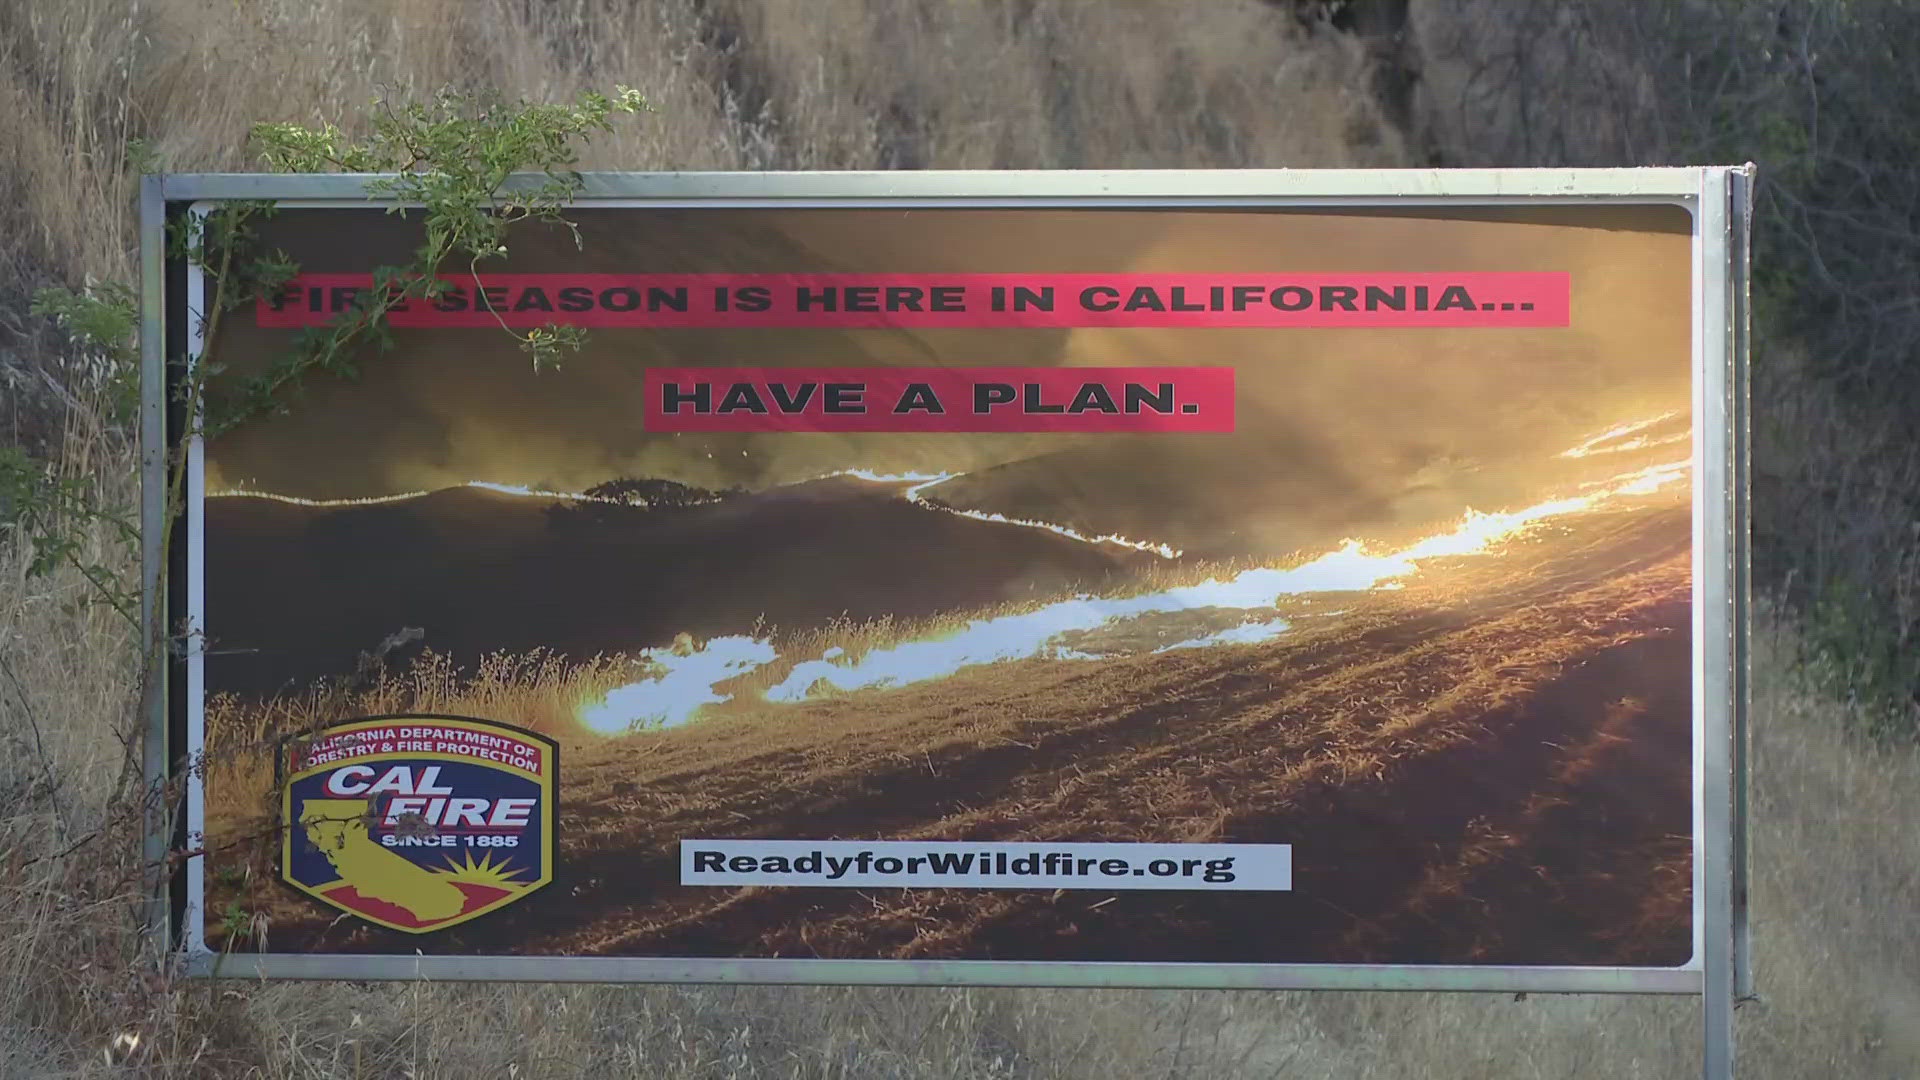 Parts of eight counties in Northern California could lose power due to fire weather conditions in Northern California.